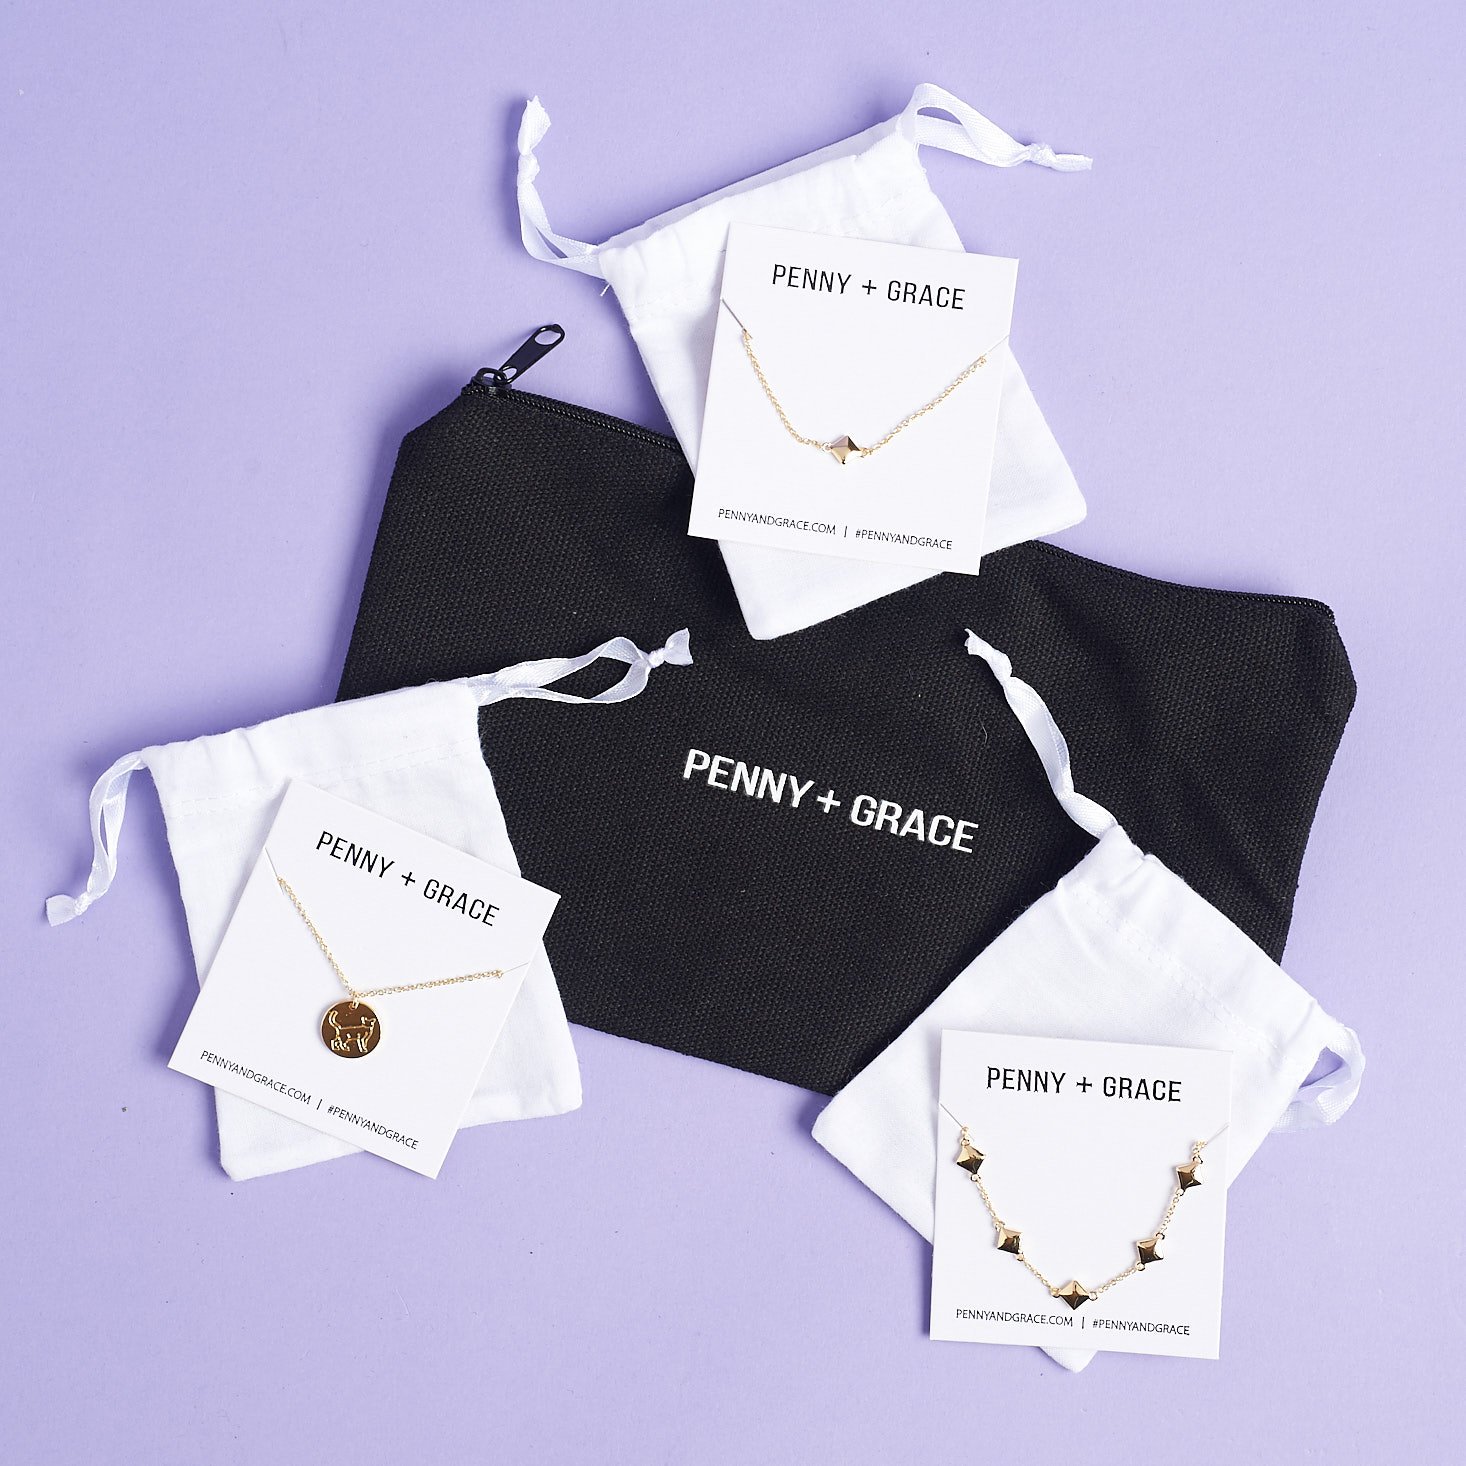 Penny + Grace Black Friday Deal – Save 50% Off Your First Box + Free Surprise Jewelry!